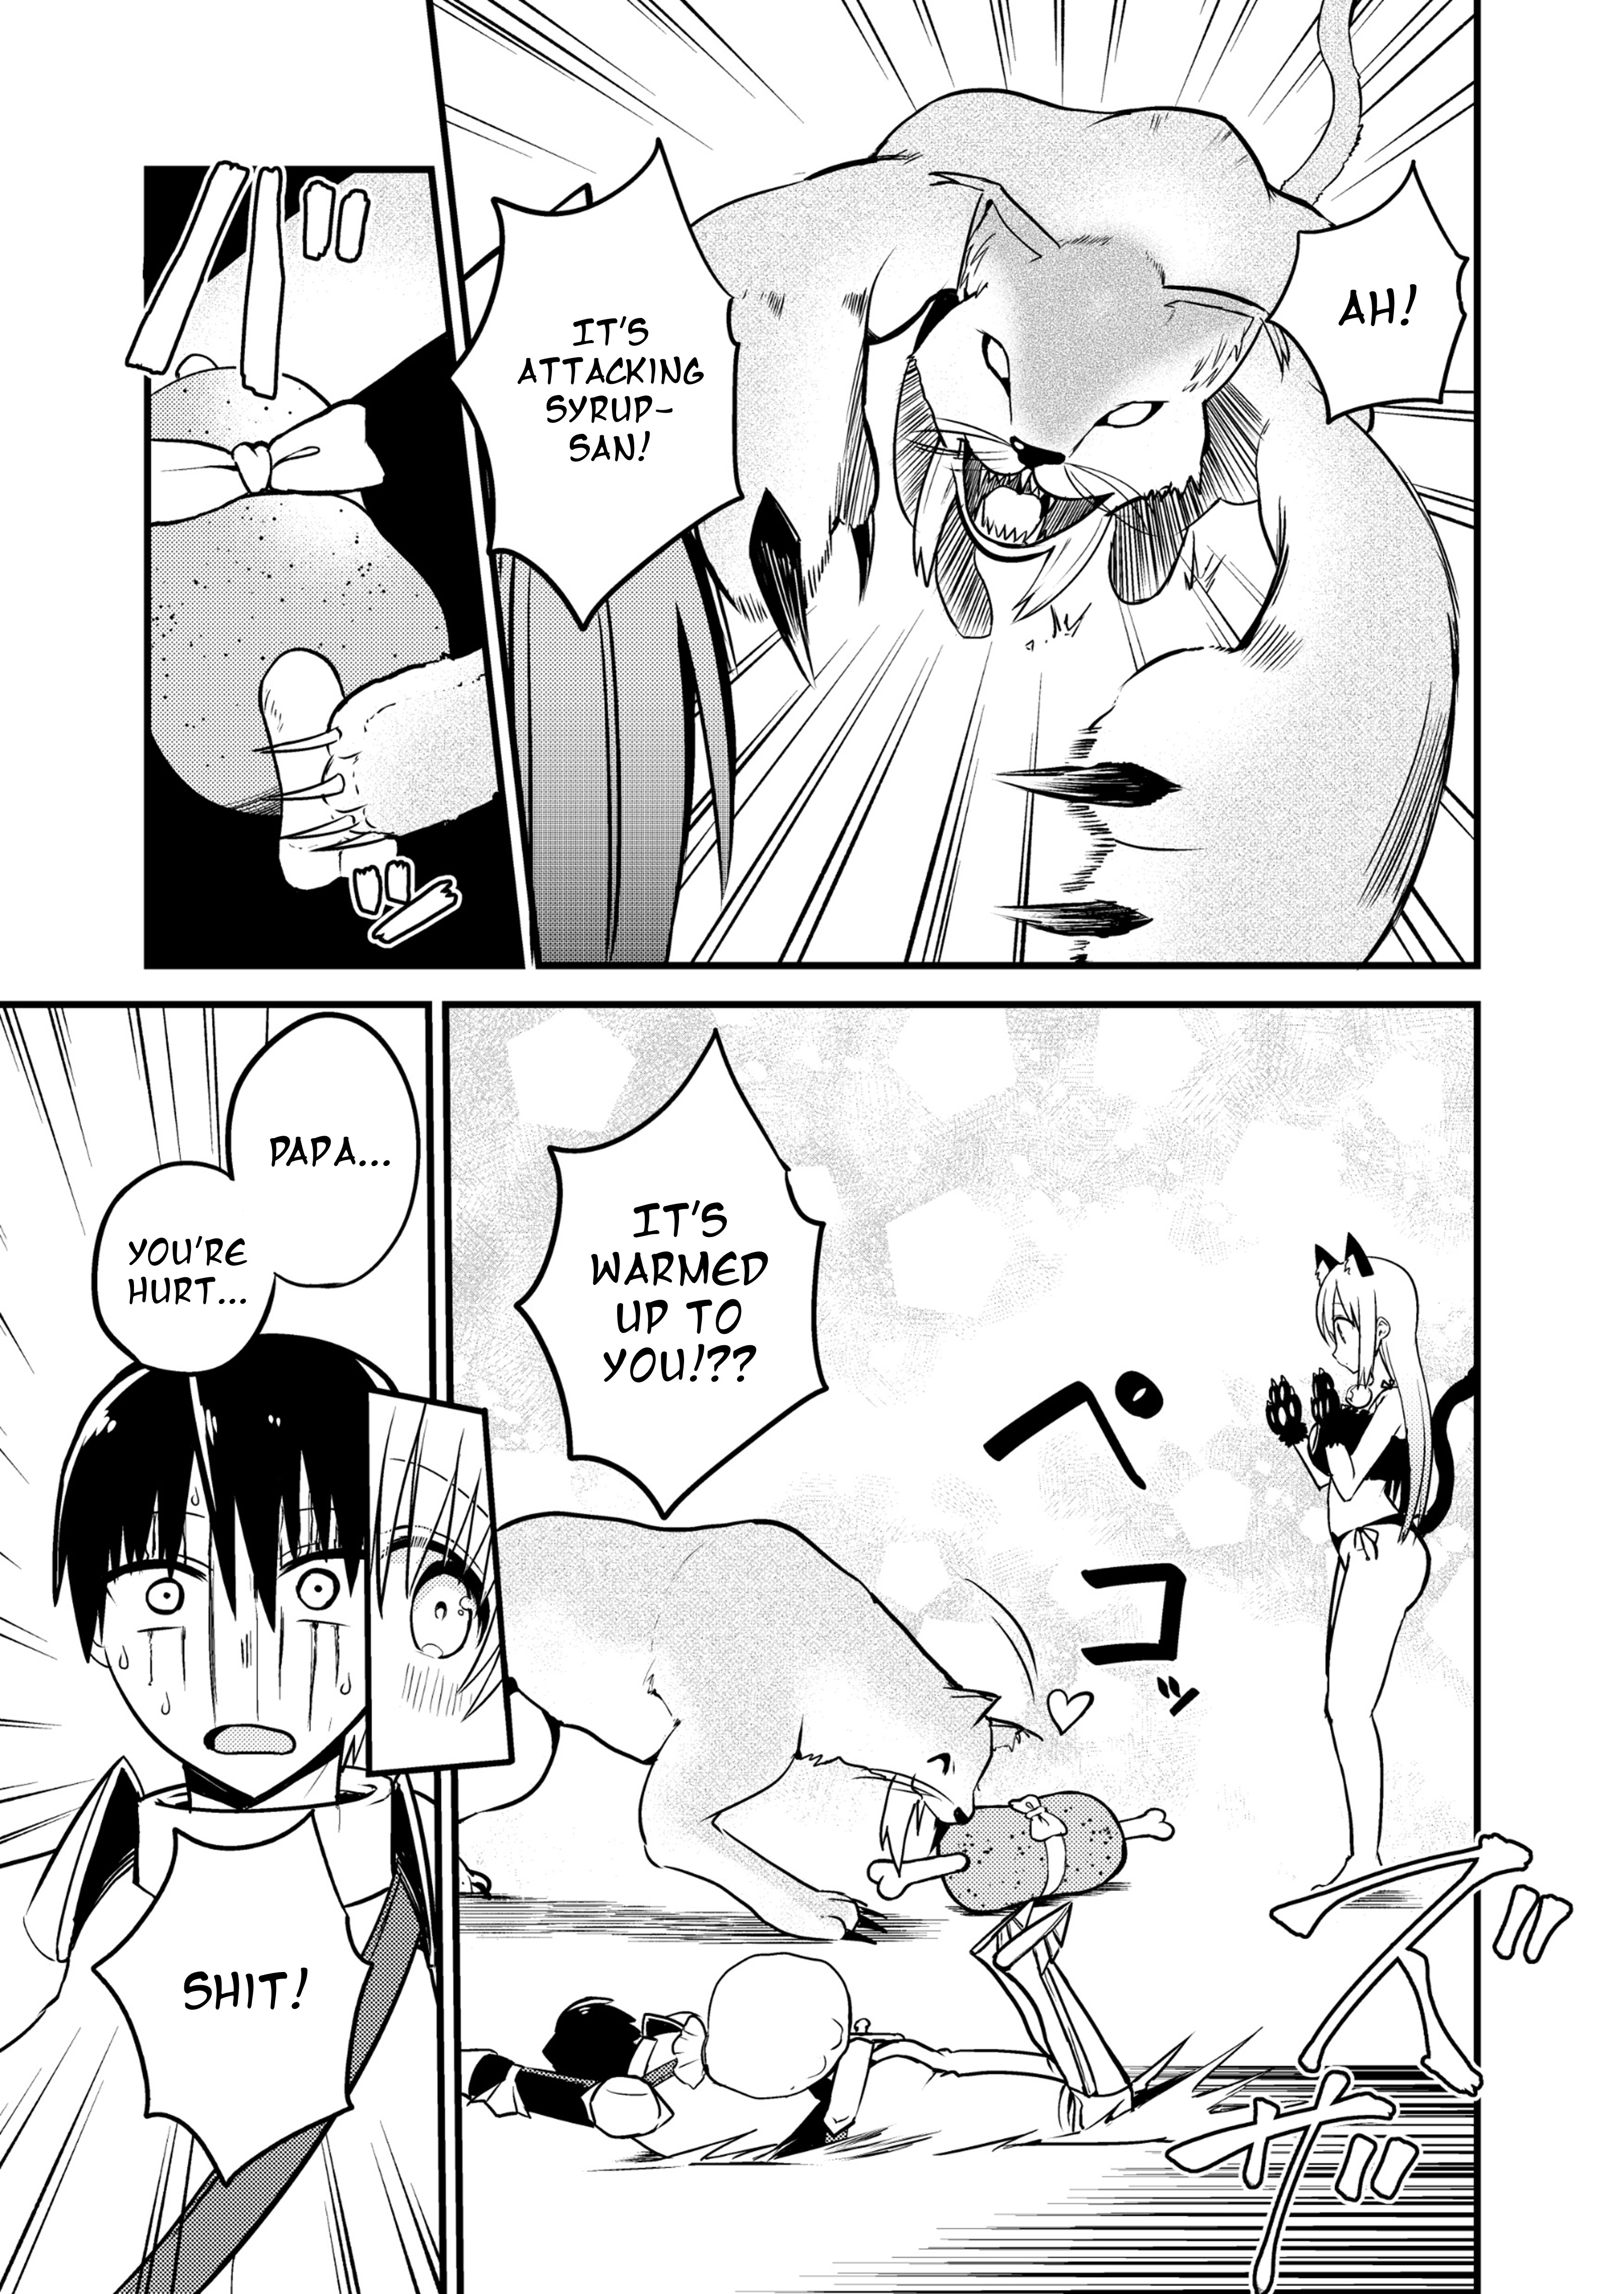 Shiro Madoushi Syrup-San Vol.1 Chapter 25.5: White Mage Syrup-San And A Cat - Picture 3